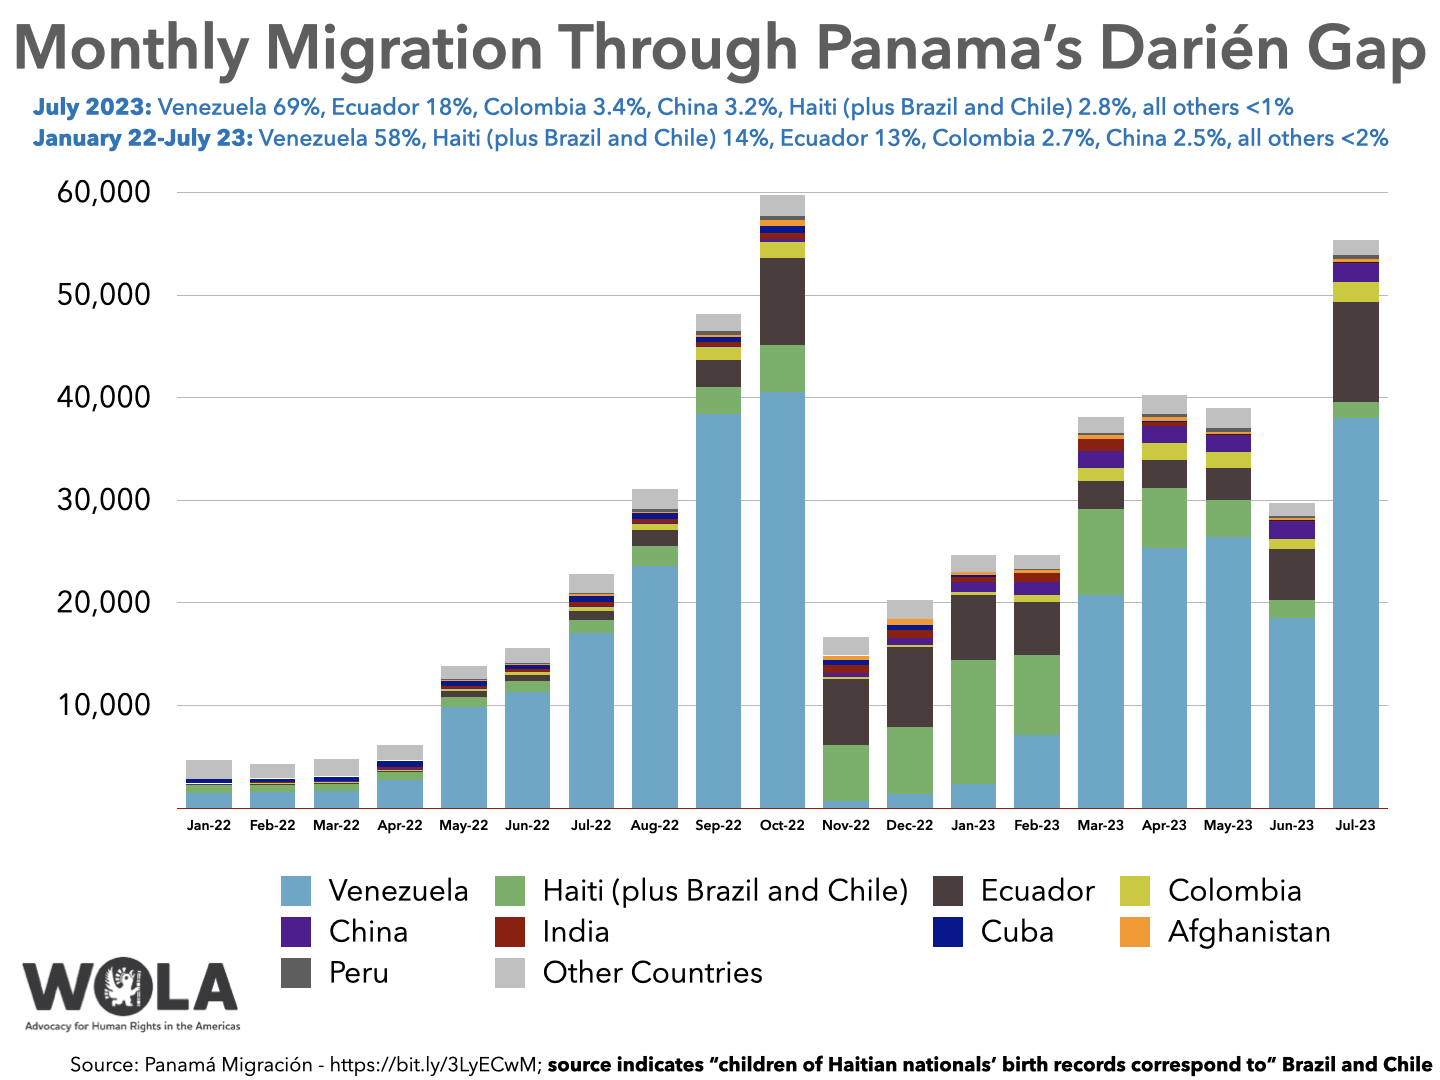 Chart: Monthly Migration Through Panama’s Darién Gap July 2023: Venezuela 69%, Ecuador 18%, Colombia 3.4%, China 3.2%, Haiti (plus Brazil and Chile) 2.8%, all others <1% January 22-July 23: Venezuela 58%, Haiti (plus Brazil and Chile) 14%, Ecuador 13%, Colombia 2.7%, China 2.5%, all others <2% Jan-22 Feb-22 Mar-22 Apr-22 May-22 Jun-22 Jul-22 Aug-22 Sep-22 Oct-22 Nov-22 Dec-22 Jan-23 Feb-23 Mar-23 Apr-23 May-23 Jun-23 Jul-23 Venezuela 1421 1573 1704 2694 9844 11359 17066 23632 38399 40593 668 1374 2337 7097 20816 25395 26409 18501 38033 Haiti (plus Brazil and Chile) 807 627 658 785 997 1025 1245 1921 2642 4525 5520 6535 12063 7813 8335 5832 3633 1743 1548 Ecuador 100 156 121 181 527 555 883 1581 2594 8487 6350 7821 6352 5203 2772 2683 3059 5052 9773 Colombia 48 72 59 72 248 287 407 569 1306 1600 208 188 333 637 1260 1634 1645 894 1884 China 32 39 56 59 67 66 85 119 136 274 377 695 913 1285 1657 1683 1497 1722 1789 India 67 74 88 172 179 228 431 332 350 604 813 756 562 872 1109 446 161 65 96 Cuba 367 334 361 634 567 416 574 589 490 663 535 431 142 36 35 59 59 74 123 Afghanistan 1 3 40 31 67 82 162 128 180 551 379 596 291 276 359 386 192 217 321 Peru 17 23 18 29 88 109 136 247 365 438 34 39 39 100 261 277 394 209 376 Other Countries 1842 1361 1722 1477 1310 1506 1833 1986 1742 2038 1748 1862 1602 1338 1495 1902 1913 1245 1444